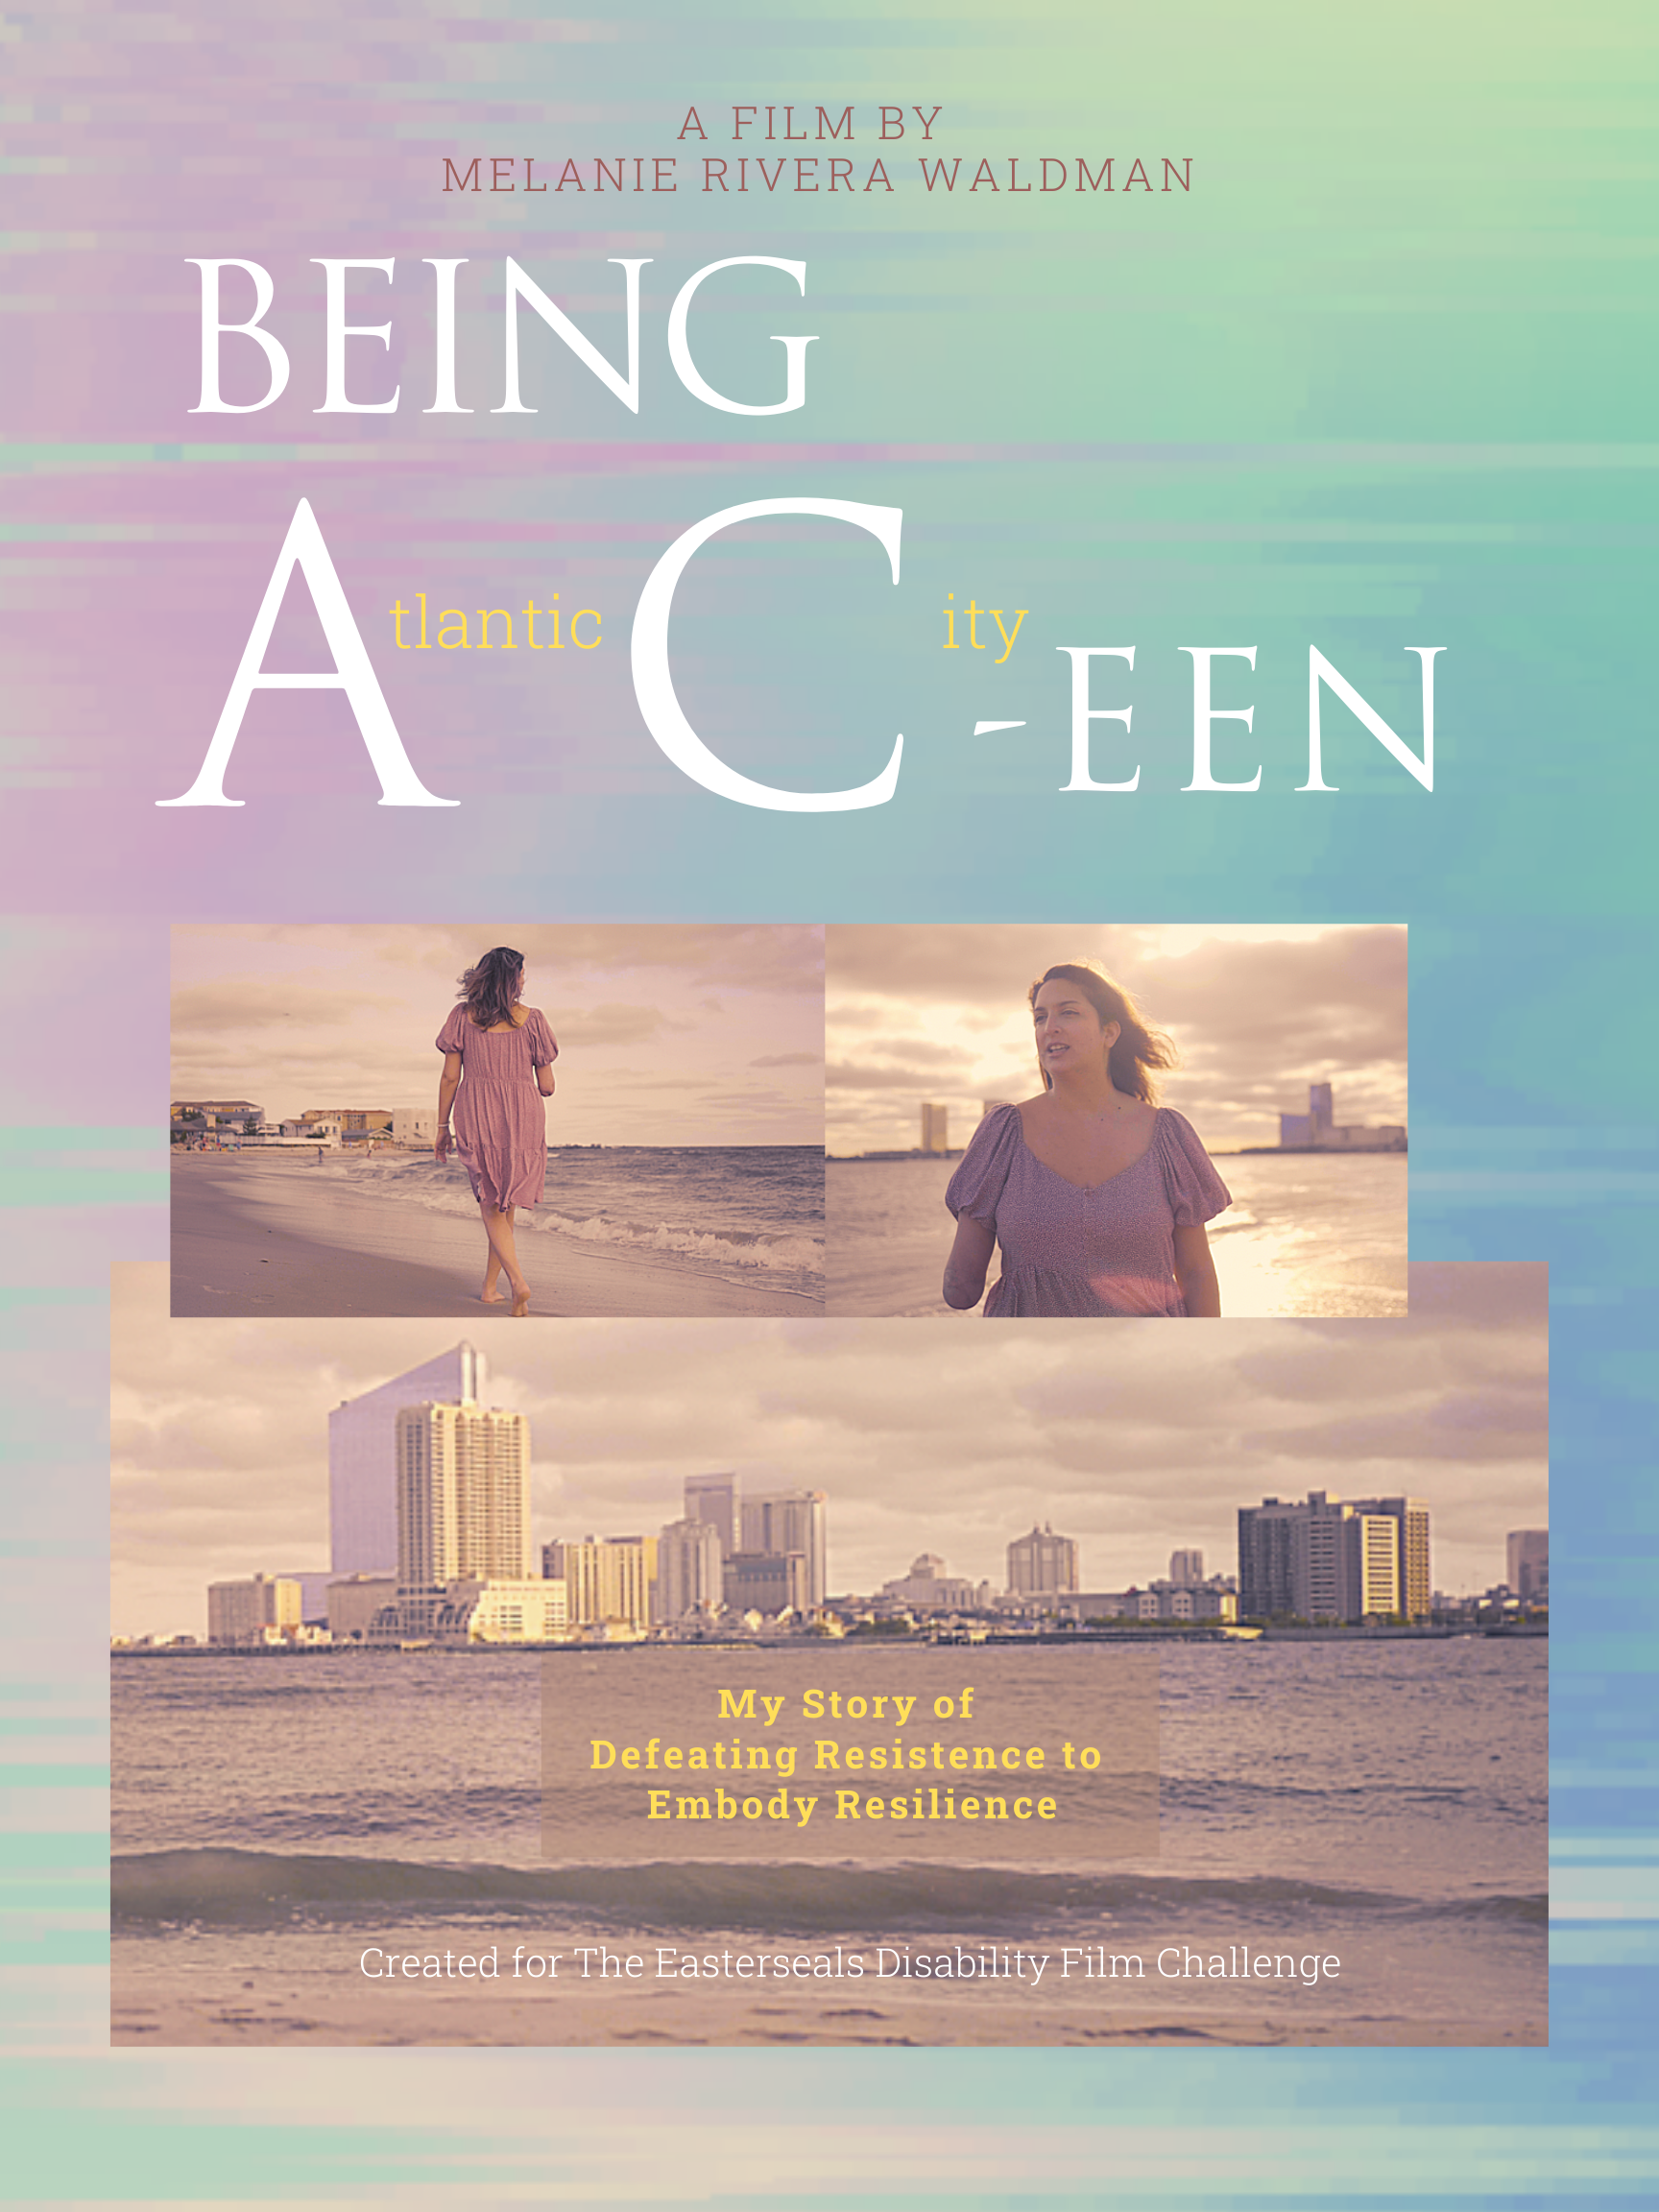 Movie Poster_Being A.C.-EEN